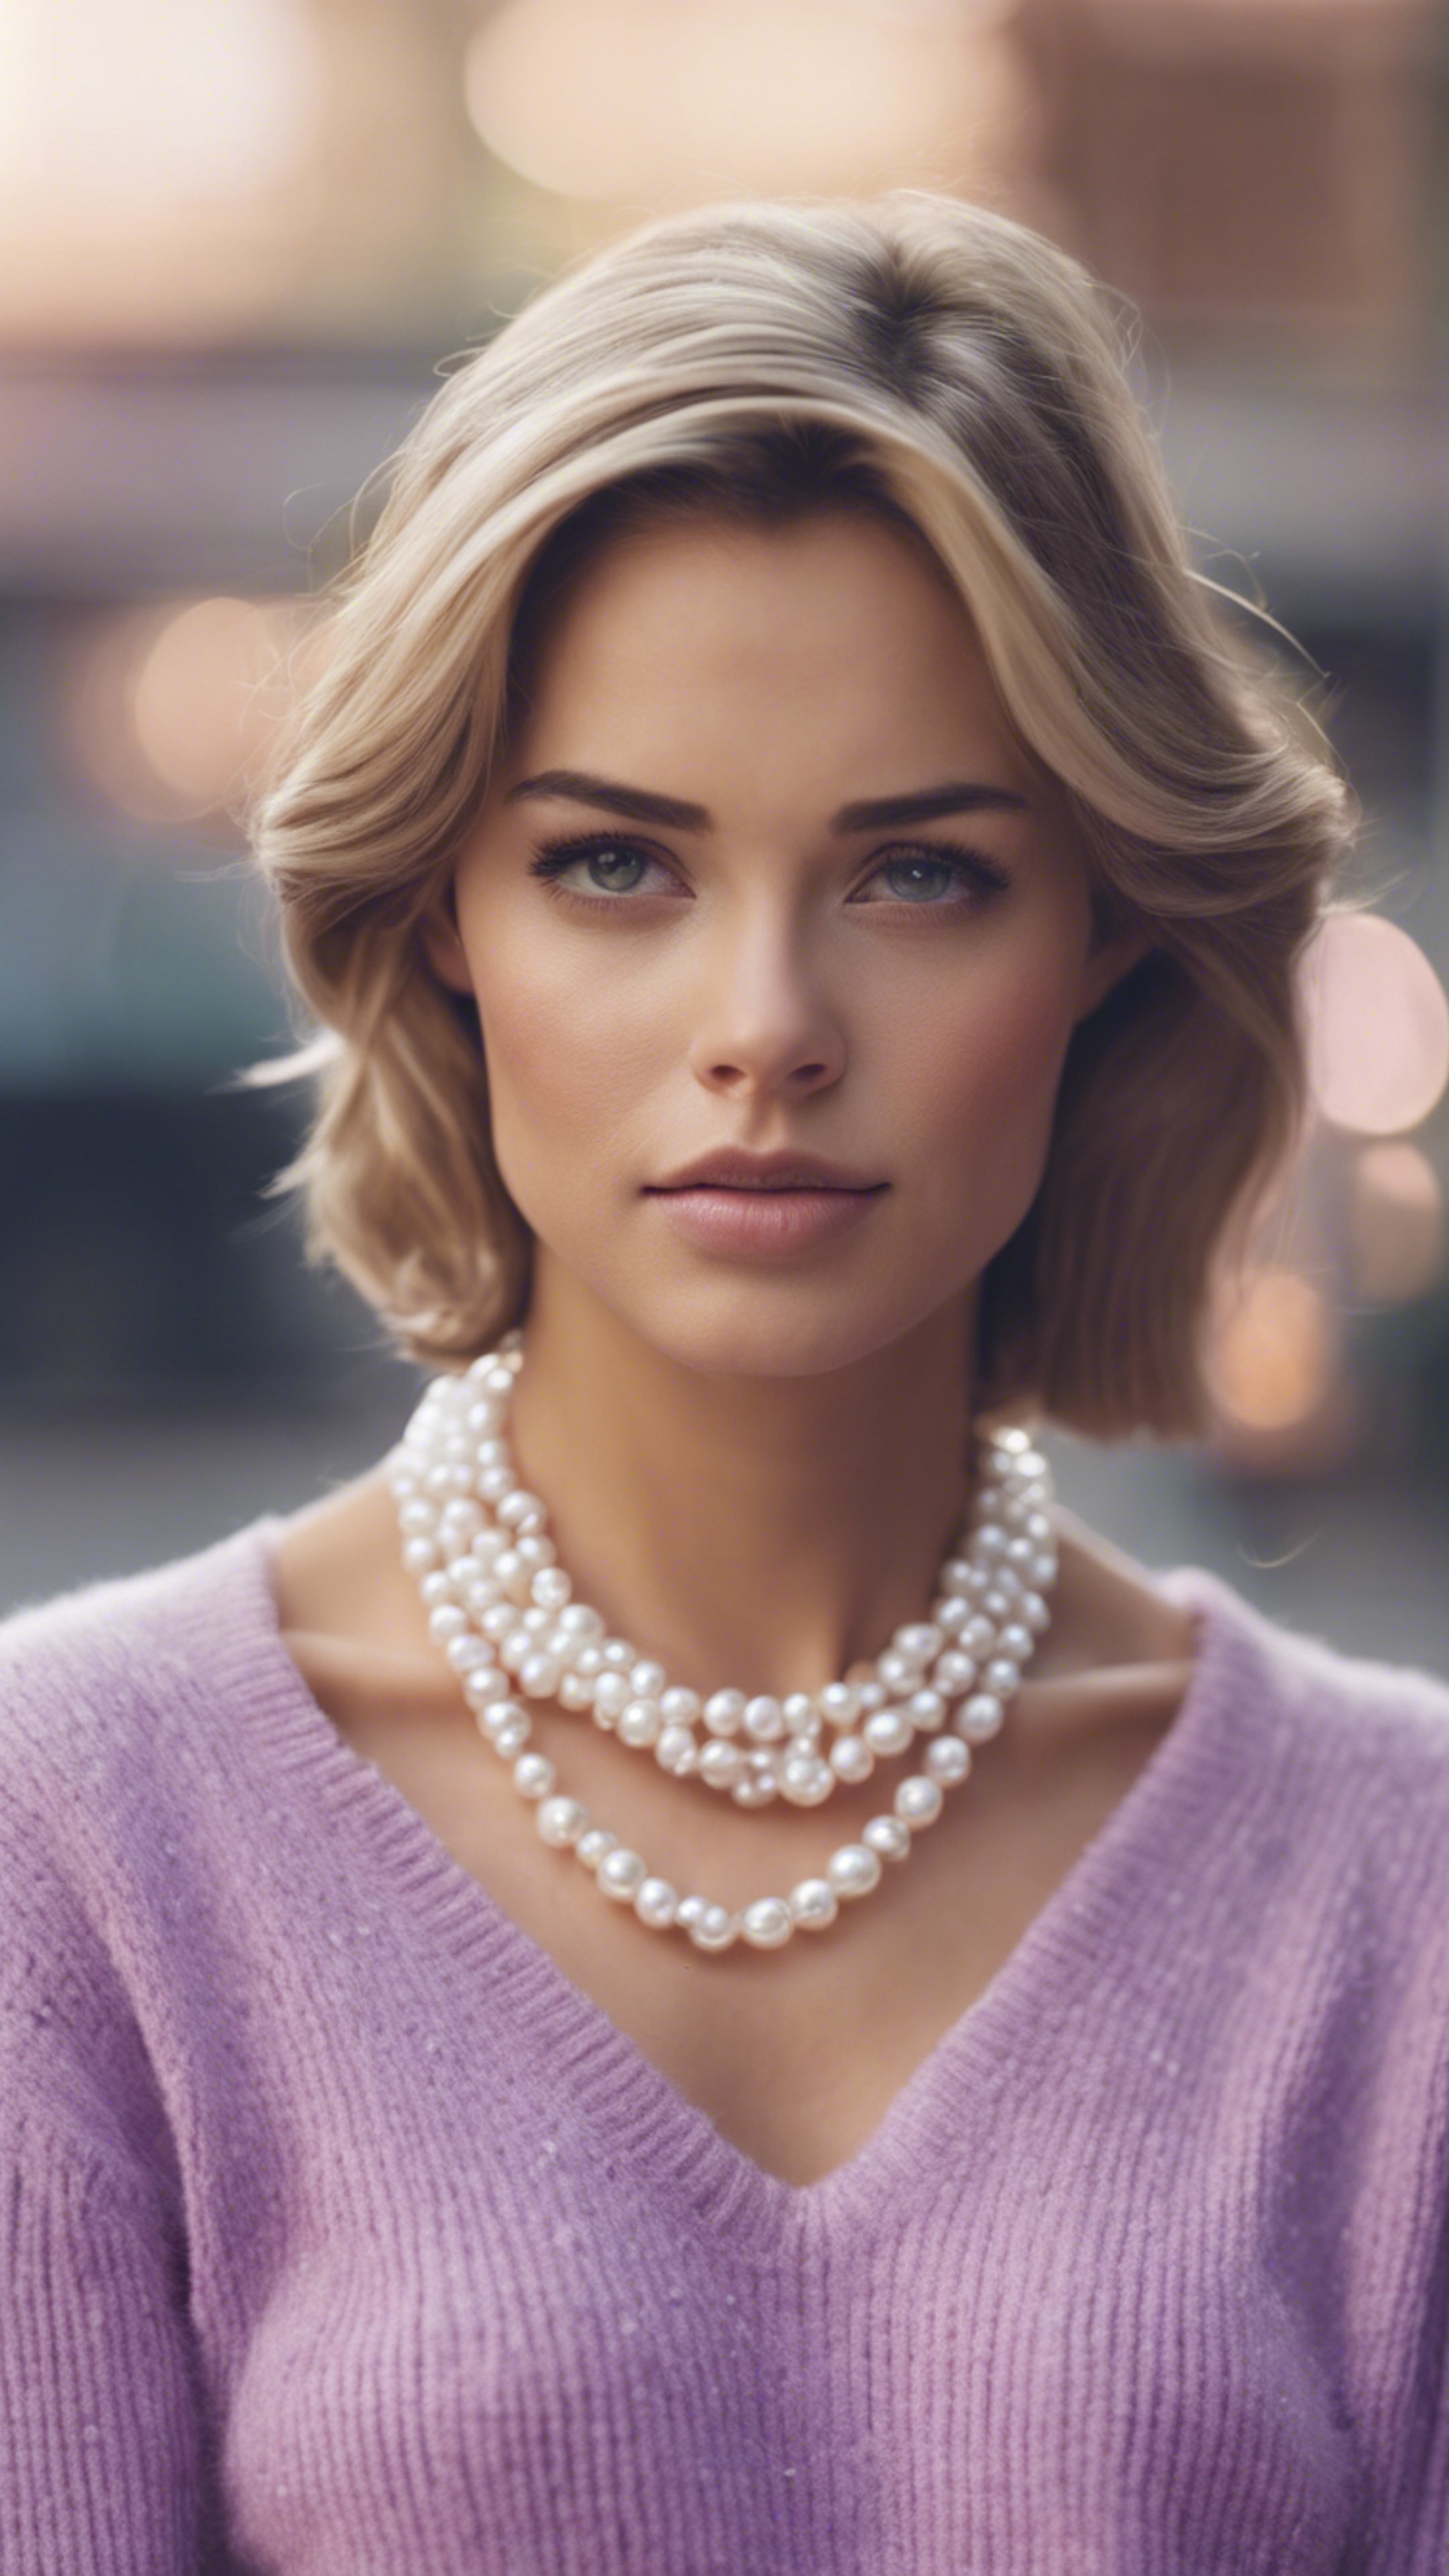 A stylish preppy woman wearing a pastel purple cashmere sweater and pearl necklace. Tapetai[eff5c75e56ed424daf90]